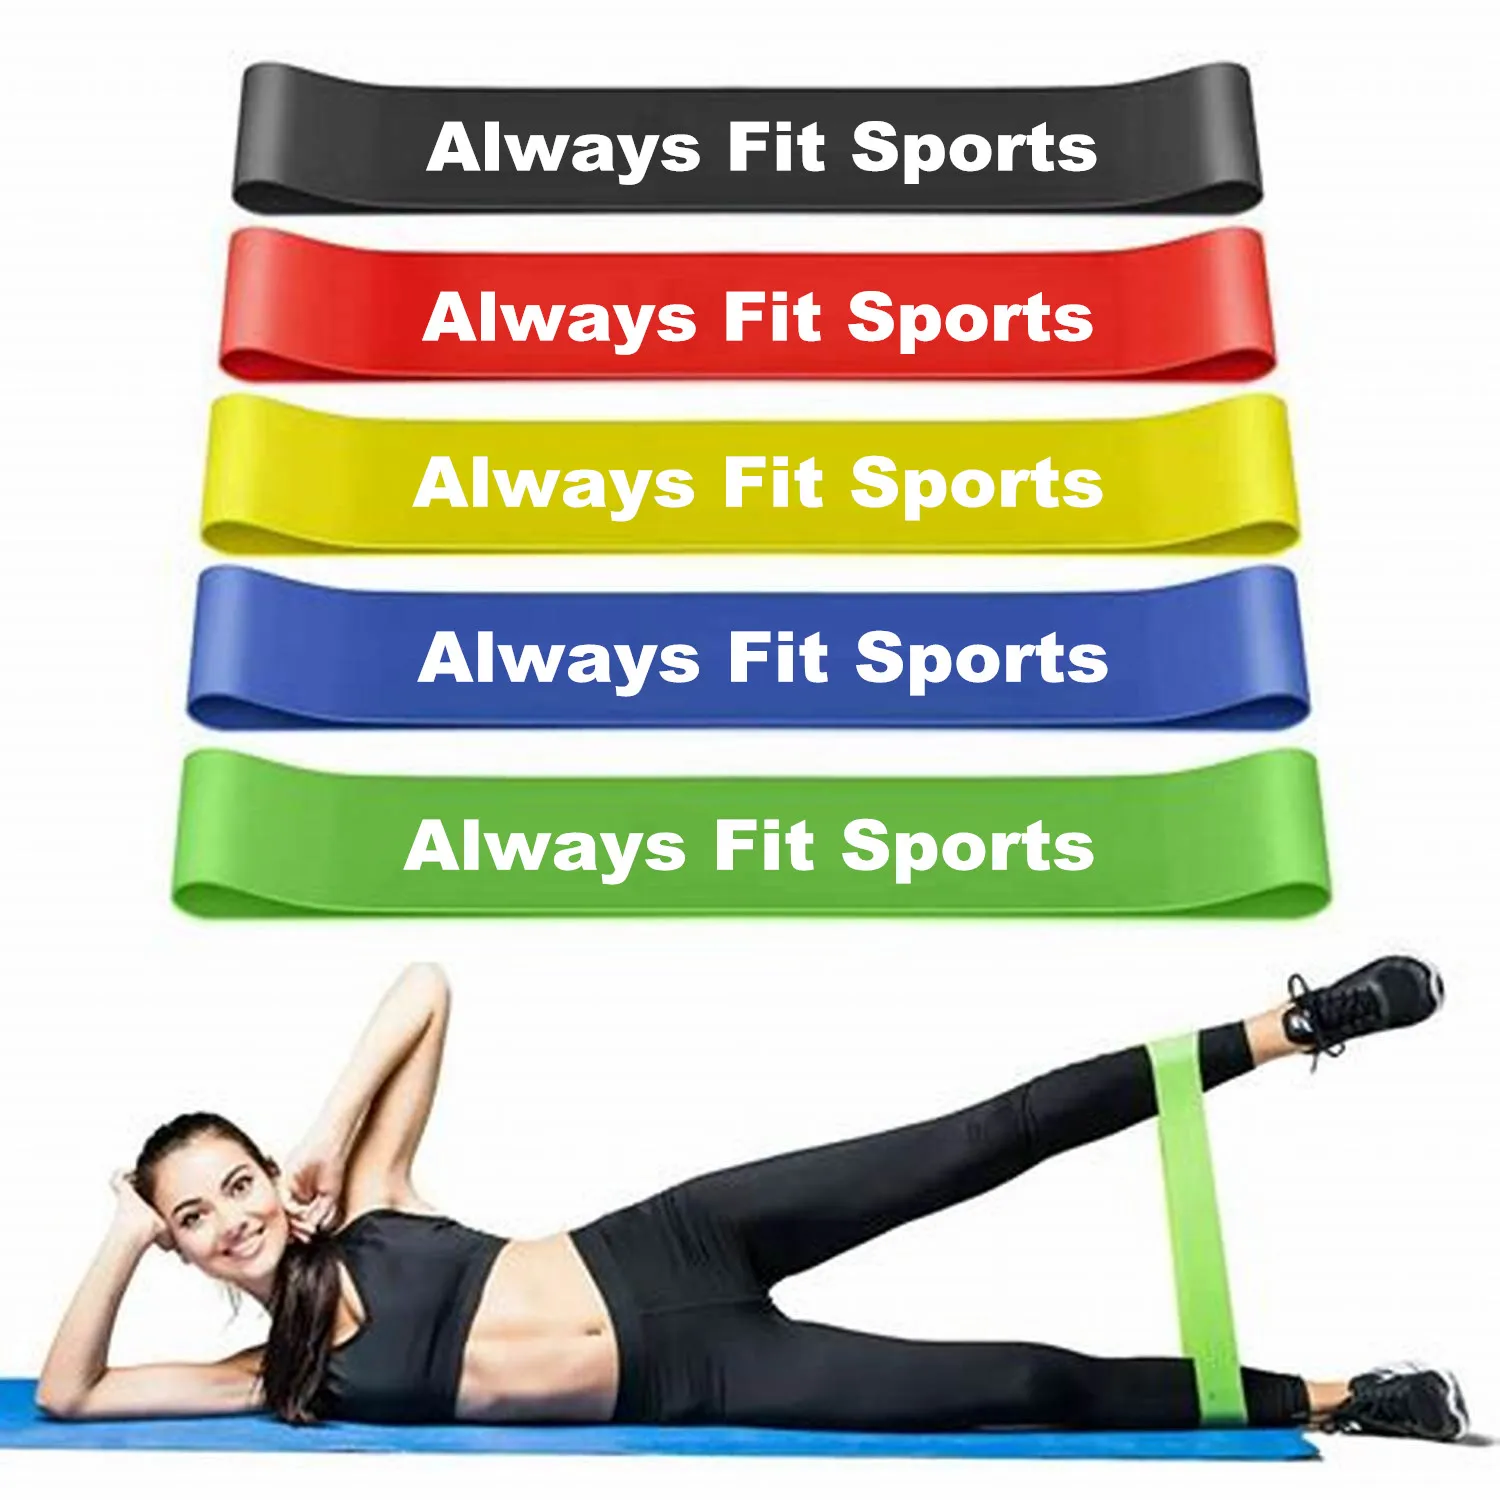 

Exercise Fitness Mini 10/12 inch Resistance elastic band fitness Loop Bands for leg and arm asist exercise, Yellow,green, red, blue, black